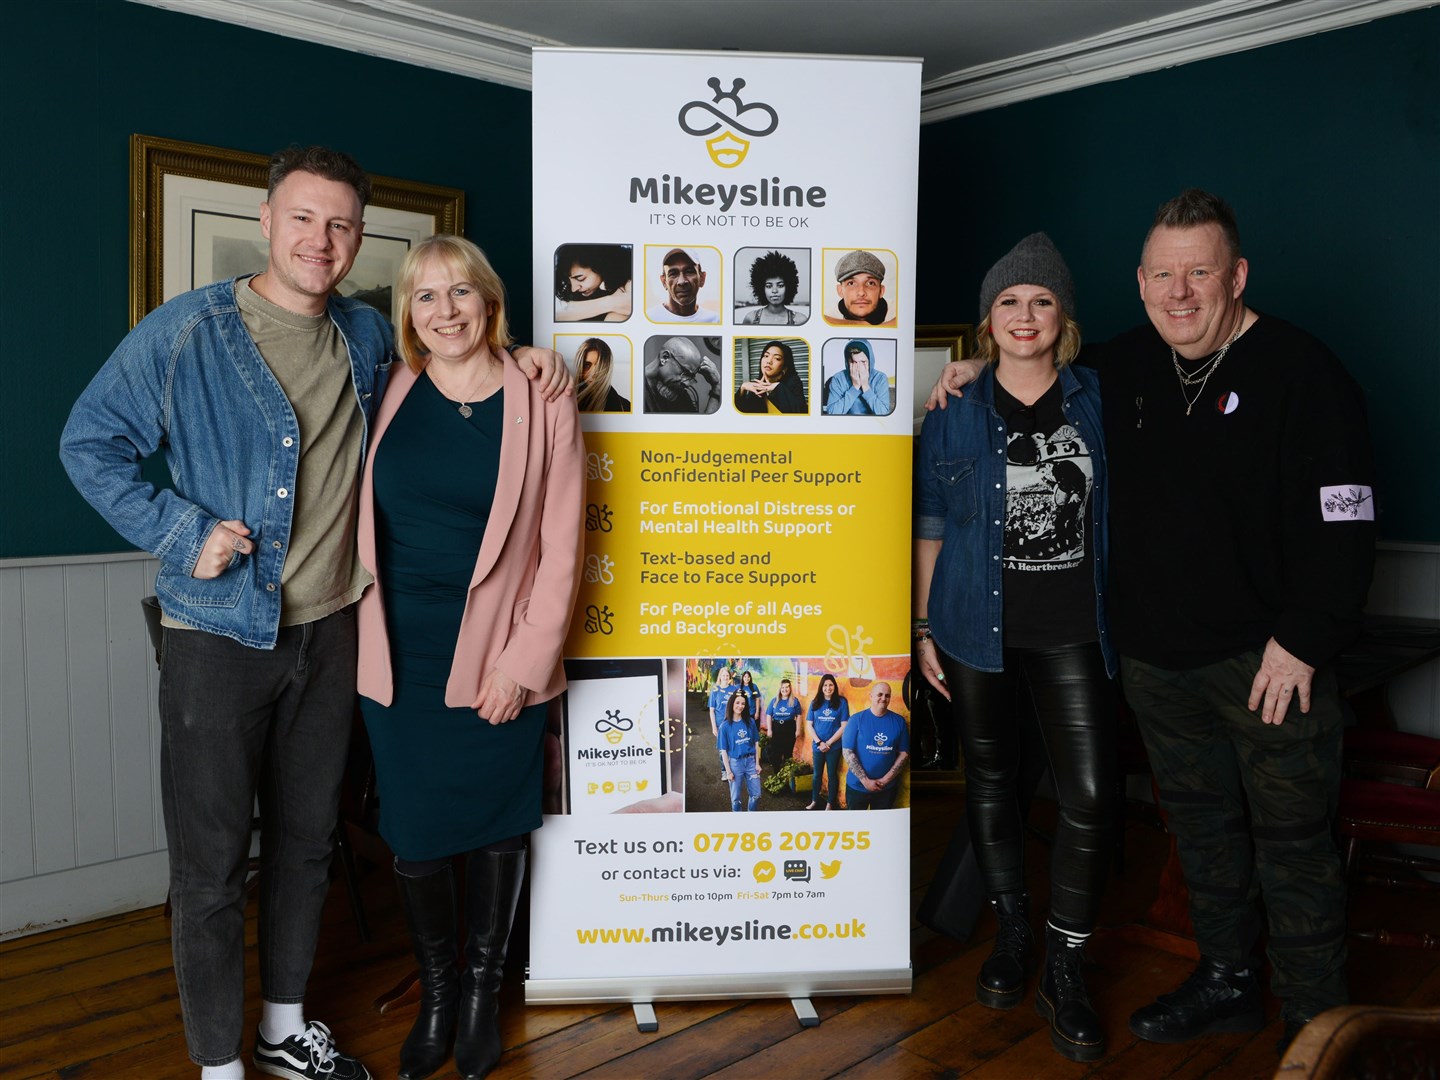 Mikeysline ambassadors Callum Beattie and Dave Rogers pictured alongside Mikeysline CEO Emily Stokes and Bee the Change manager, Allana Stables. Picture by Wonder Years Portrait Photography.